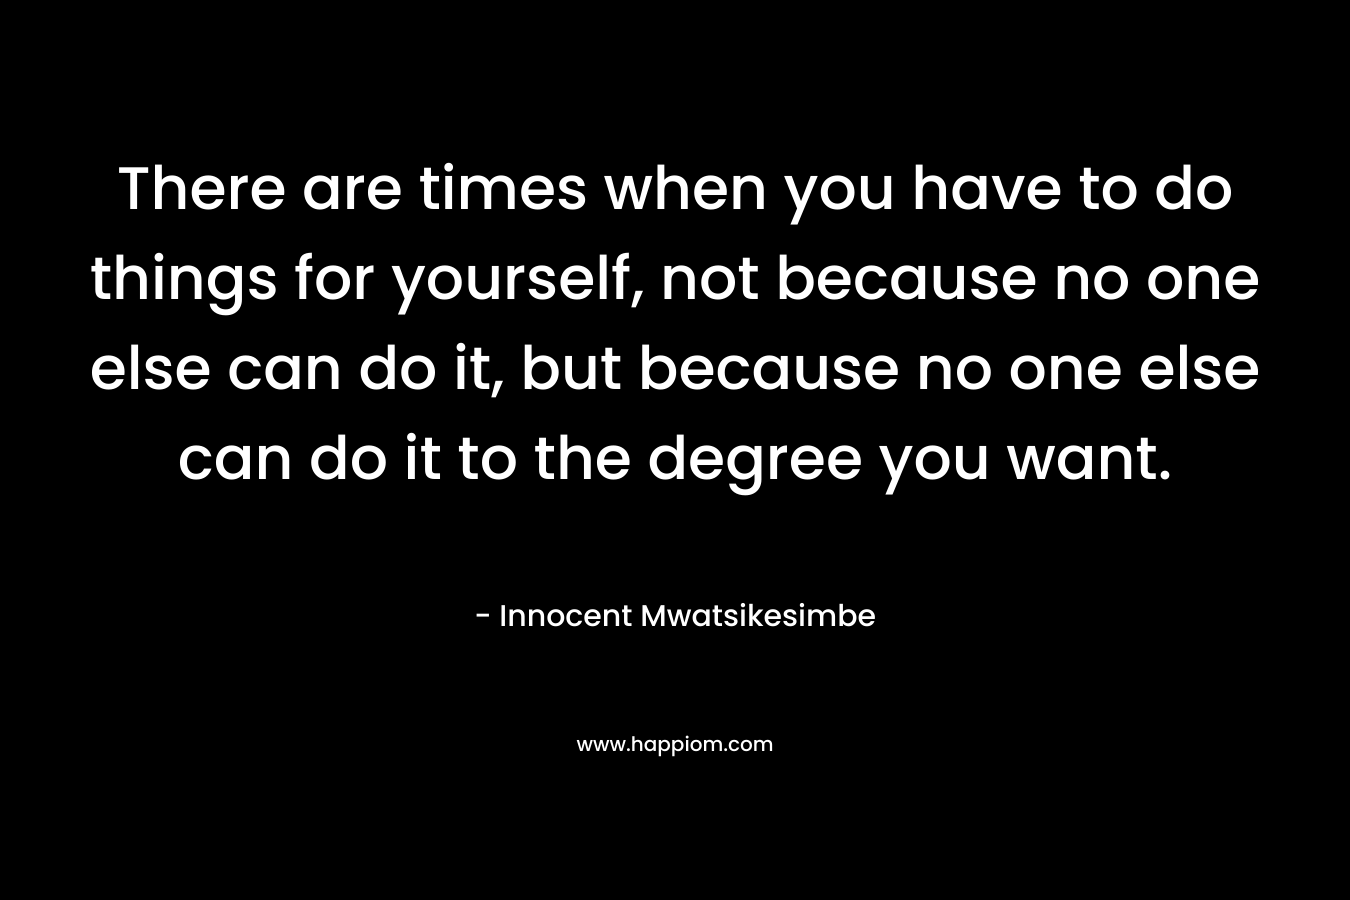 There are times when you have to do things for yourself, not because no one else can do it, but because no one else can do it to the degree you want.